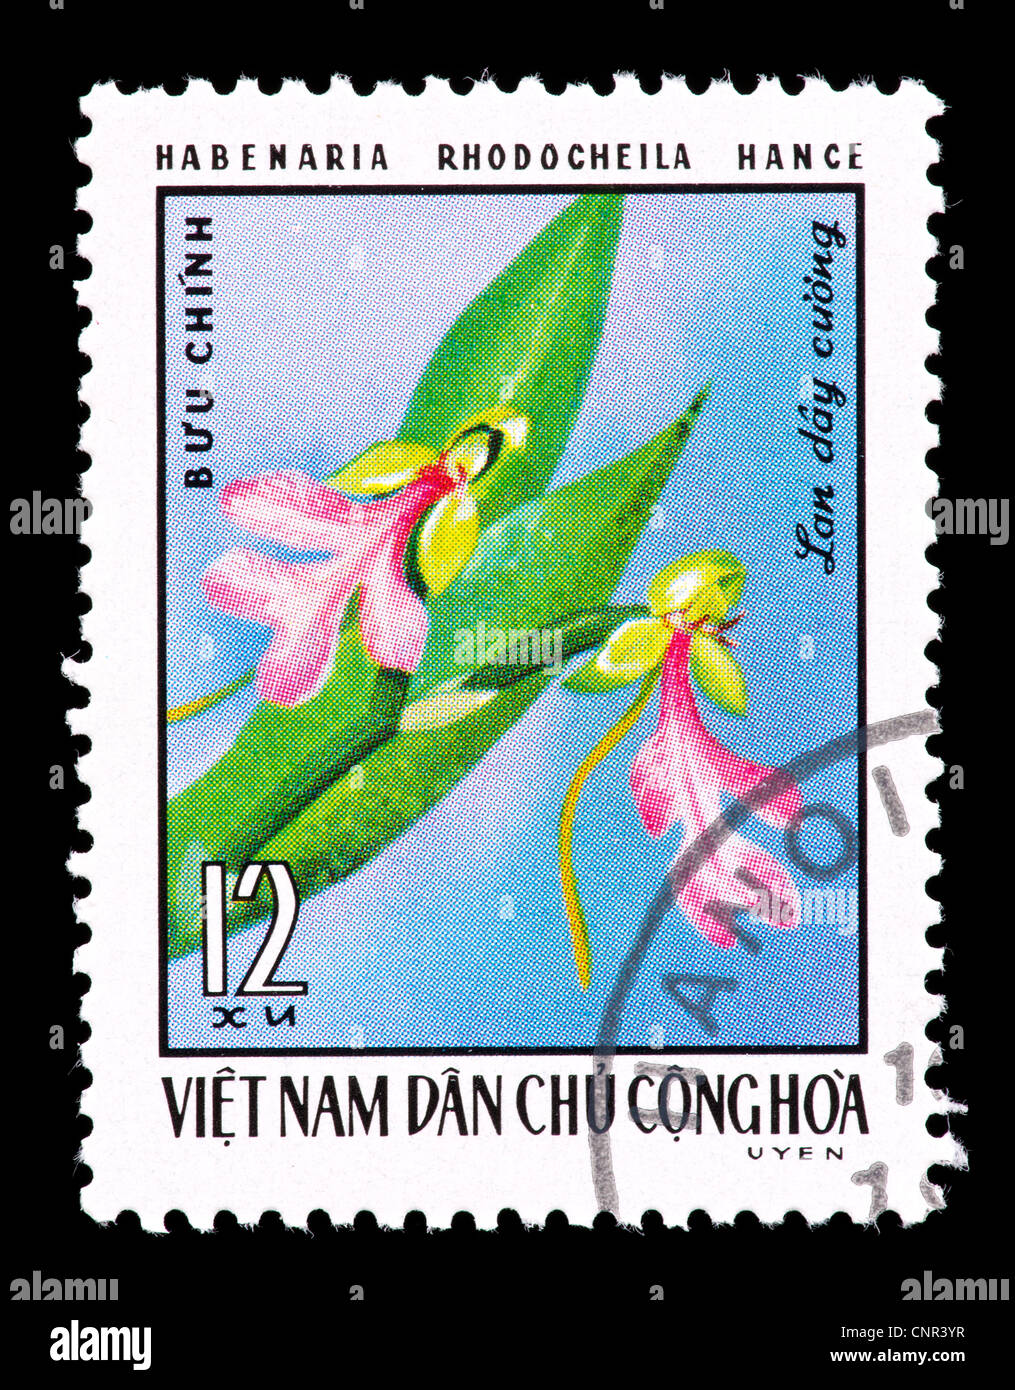 Postage stamp from Vietnam depicting an exotic orchid (Habenaria rhodocheila) Stock Photo